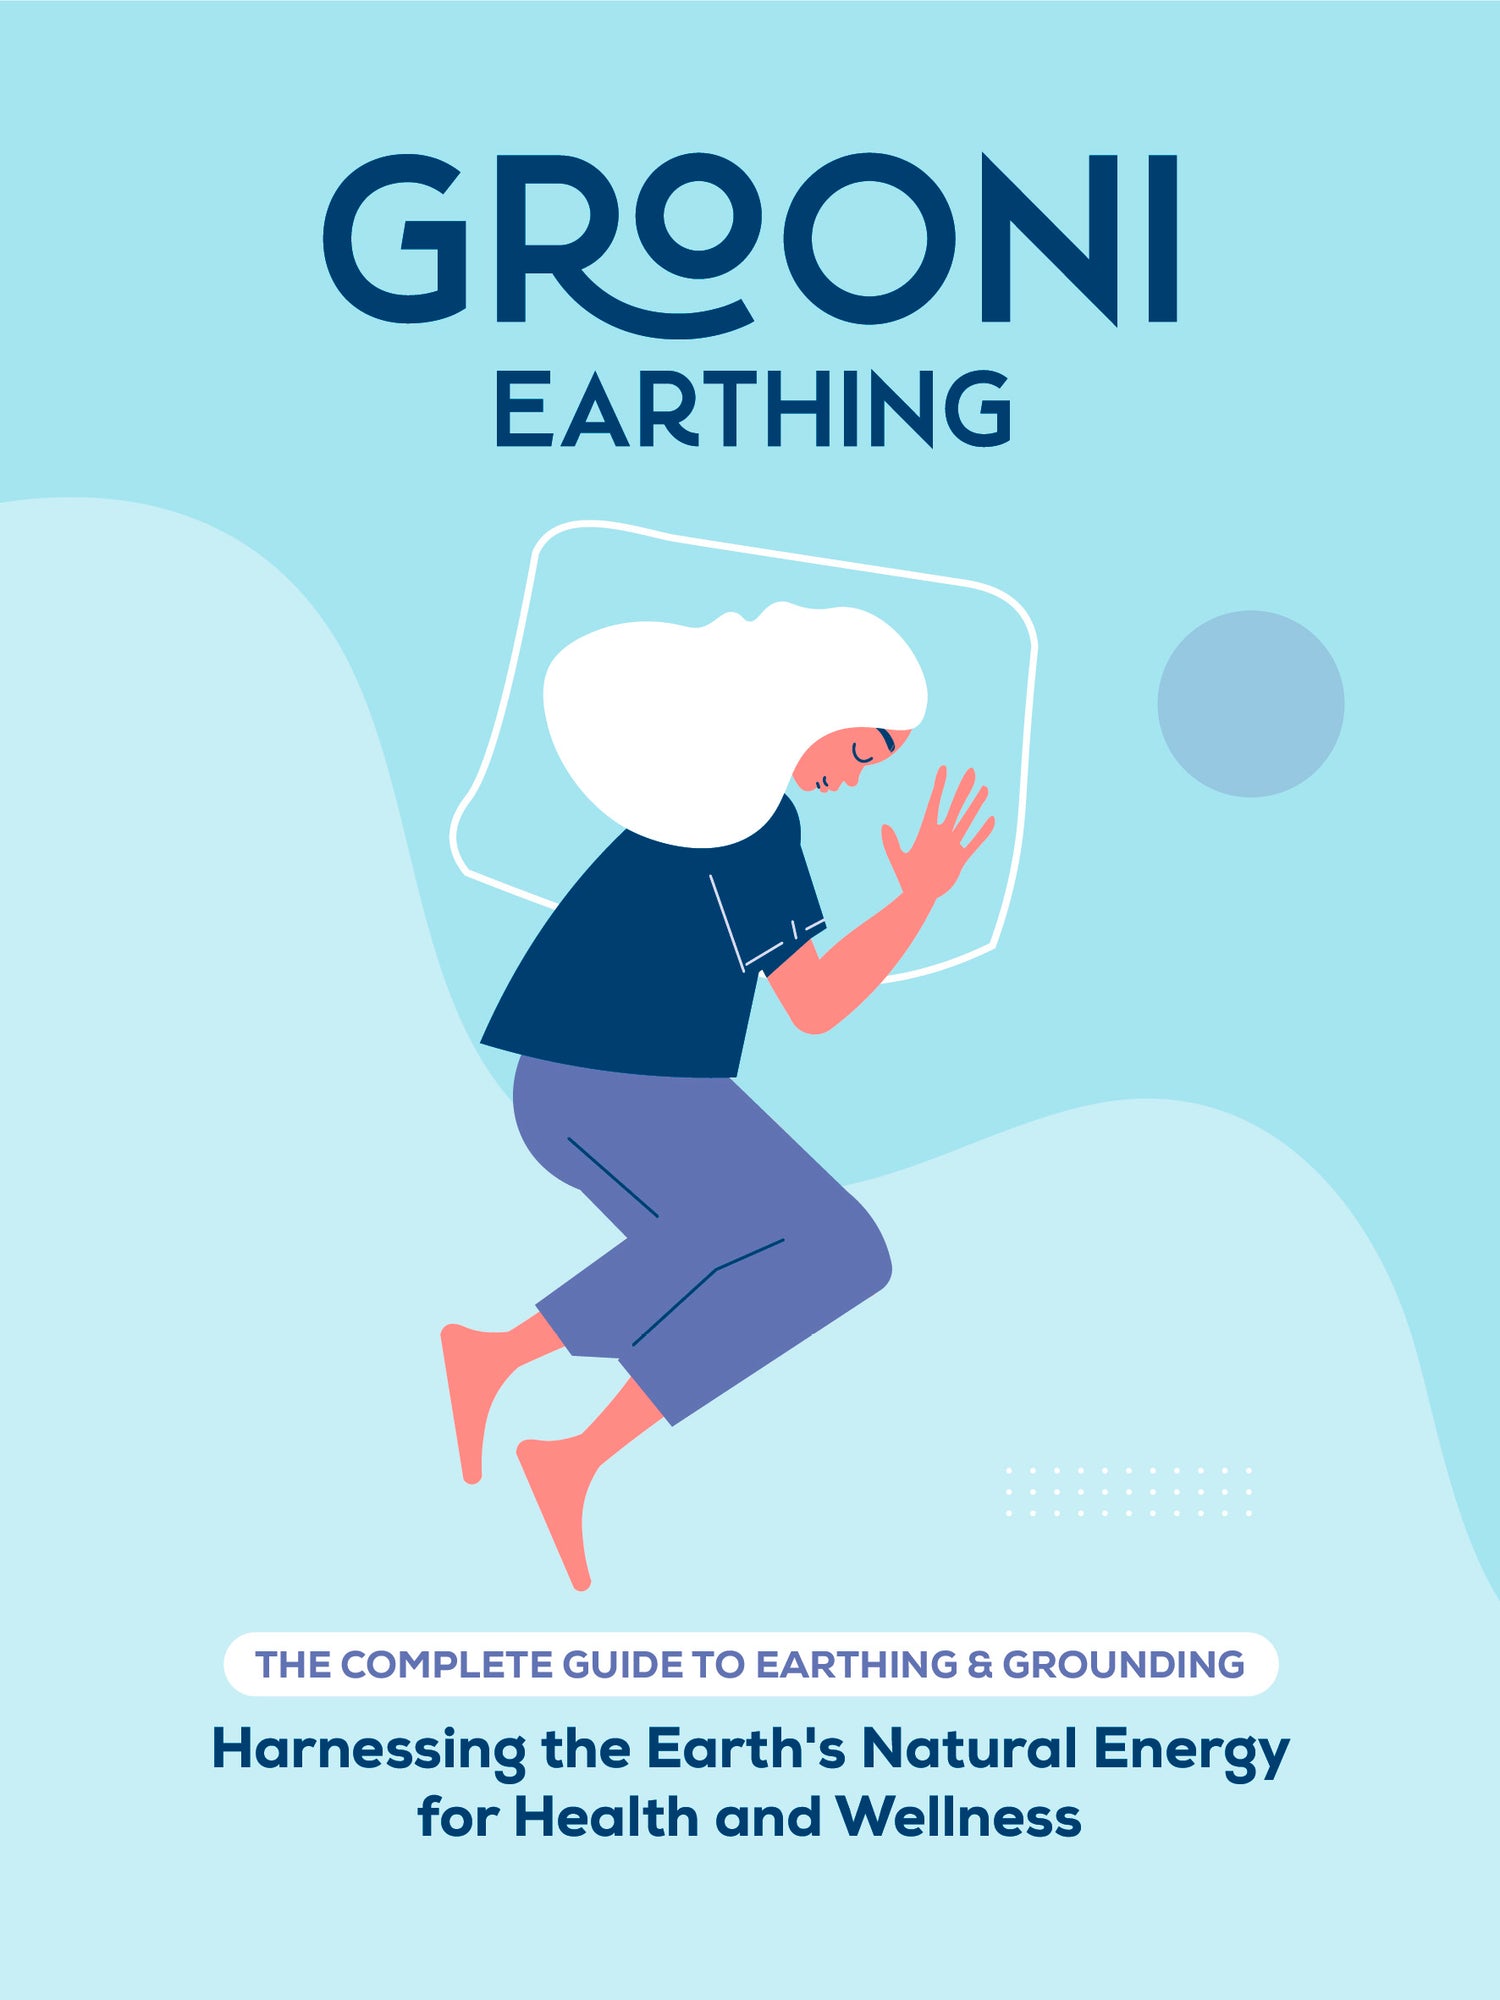 Grooni earthing - the complete guide to homeopathic healing energy for health